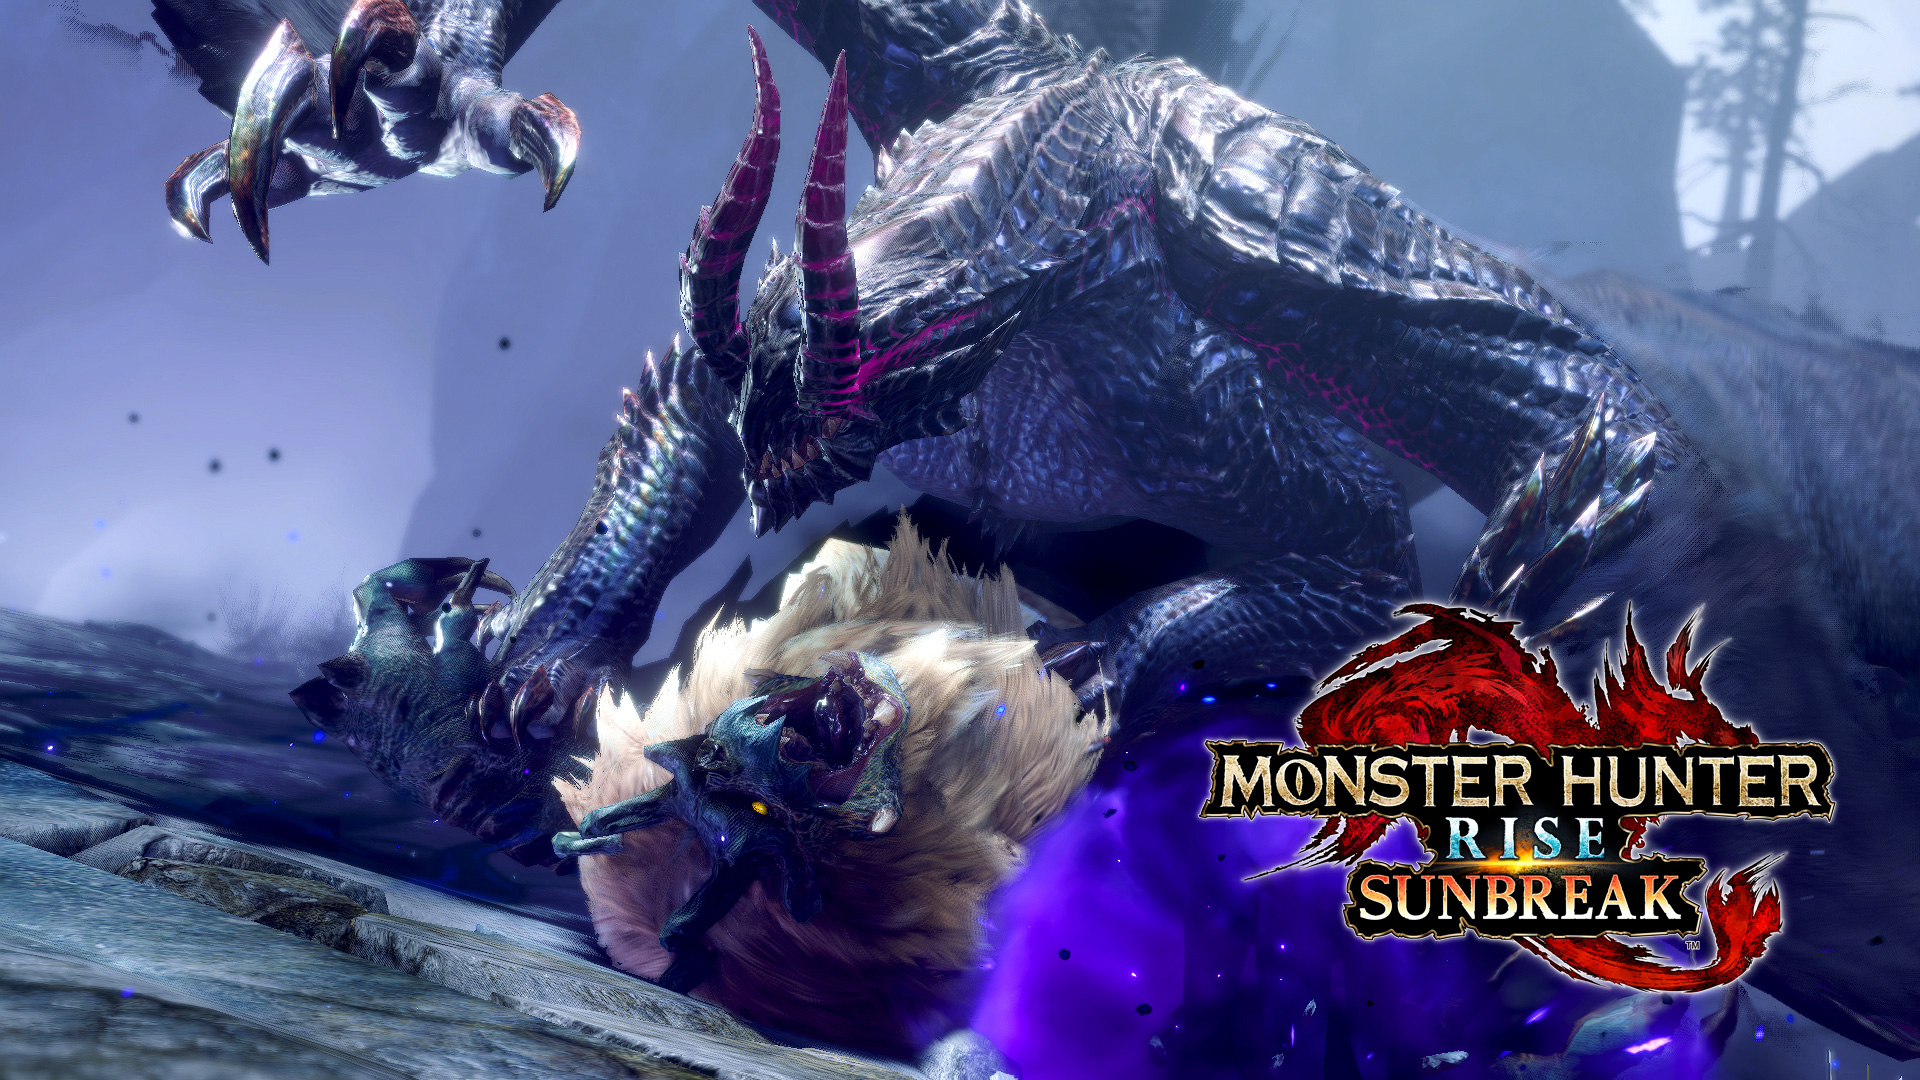 Monster Hunter to a new frontier, the Jungle! Come face to face with some of the fearsome monsters that await you. #Sunbreak